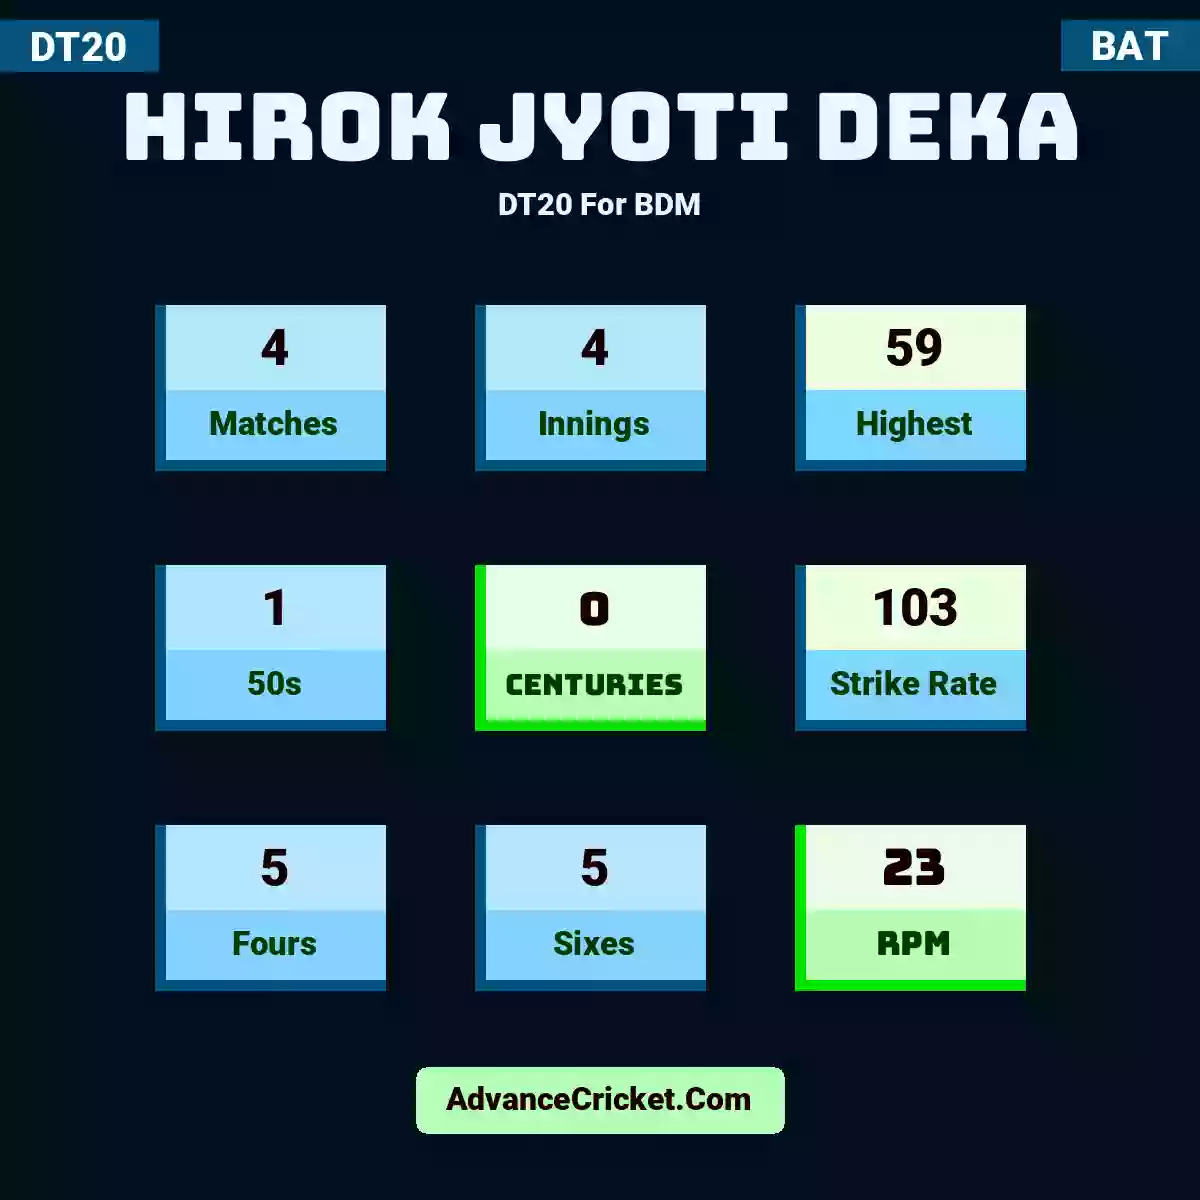 Hirok Jyoti Deka DT20  For BDM, Hirok Jyoti Deka played 4 matches, scored 59 runs as highest, 1 half-centuries, and 0 centuries, with a strike rate of 103. h.jyoti.deka hit 5 fours and 5 sixes, with an RPM of 23.